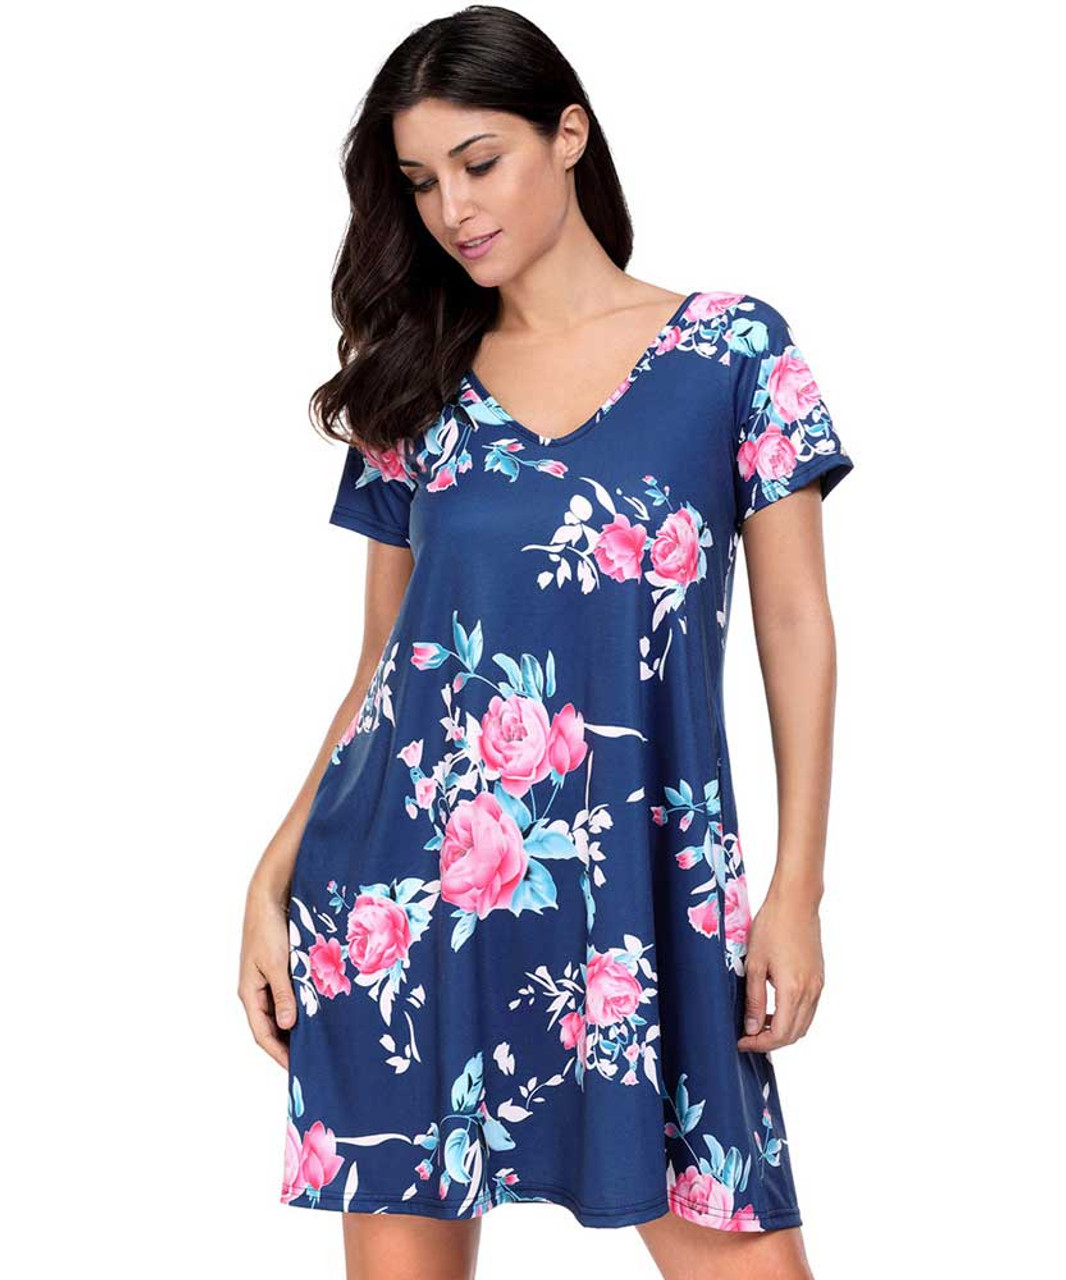 pink and blue women's dress